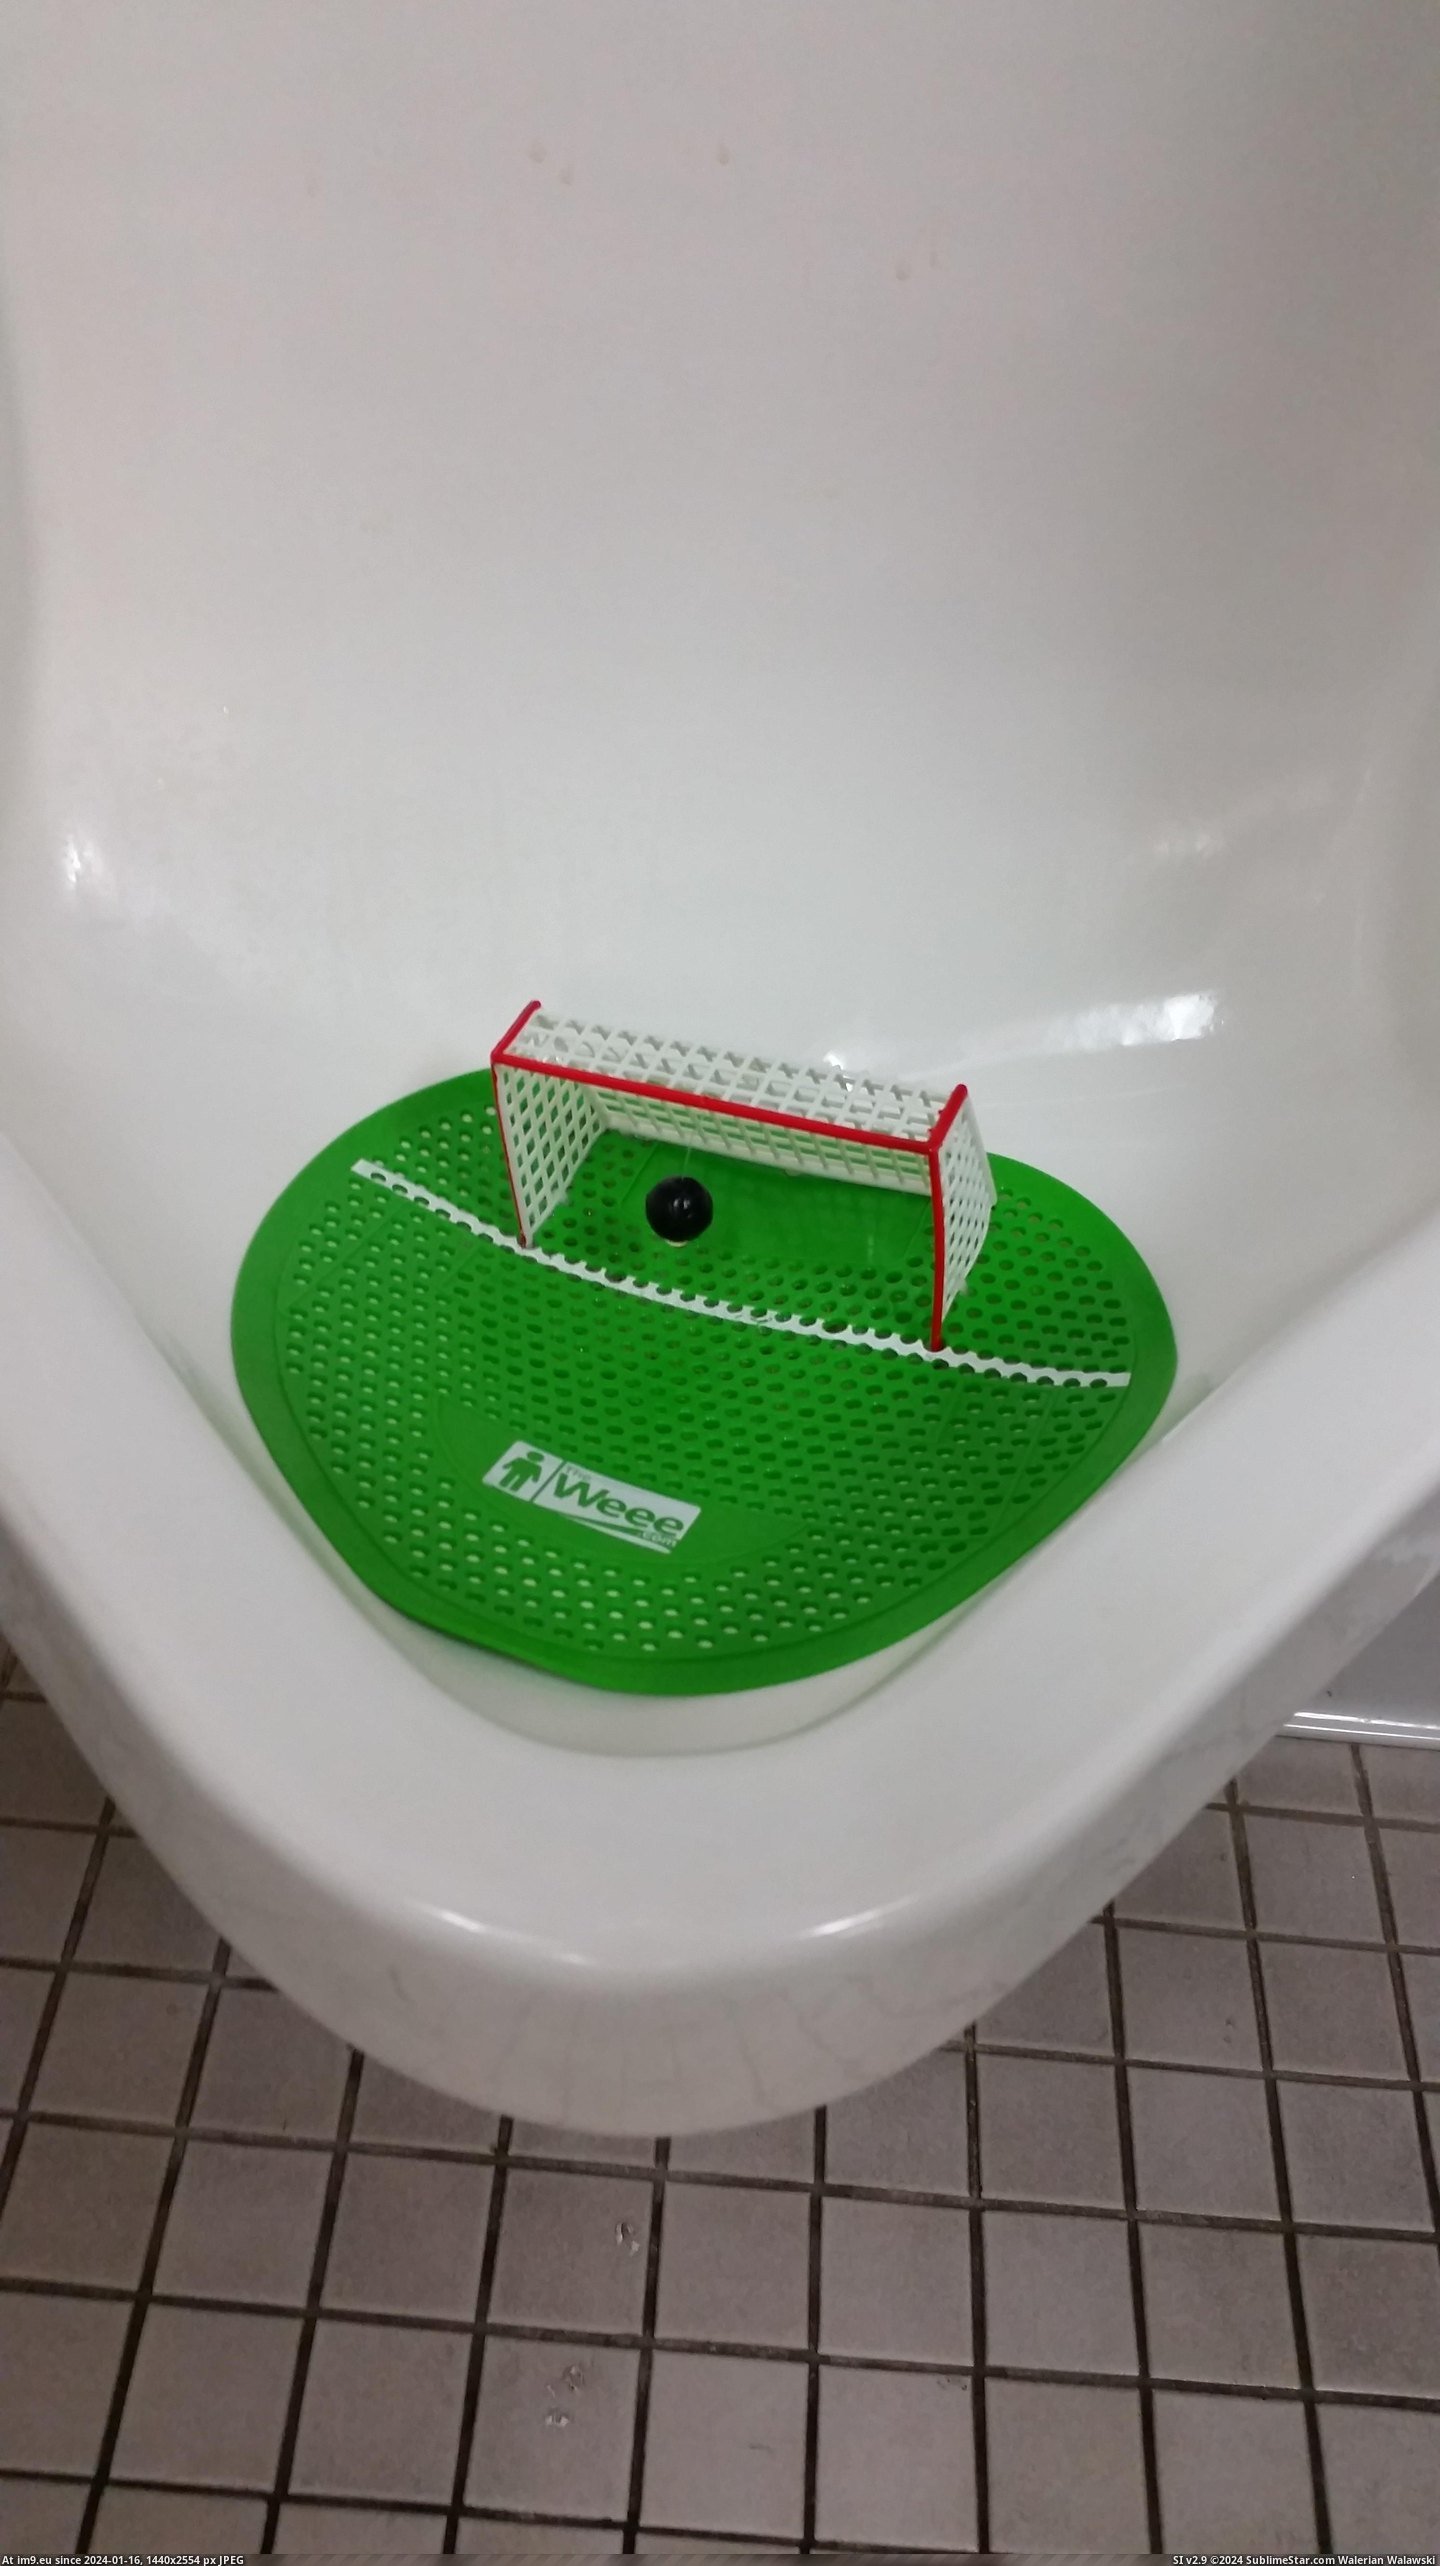 #City #Sports #Ball #Goals #Aim #Dangling #Soccer #Complex #Urinals [Mildlyinteresting] The sports complex in my city has little soccer goals in their urinals with a dangling ball you can aim at. Pic. (Image of album My r/MILDLYINTERESTING favs))